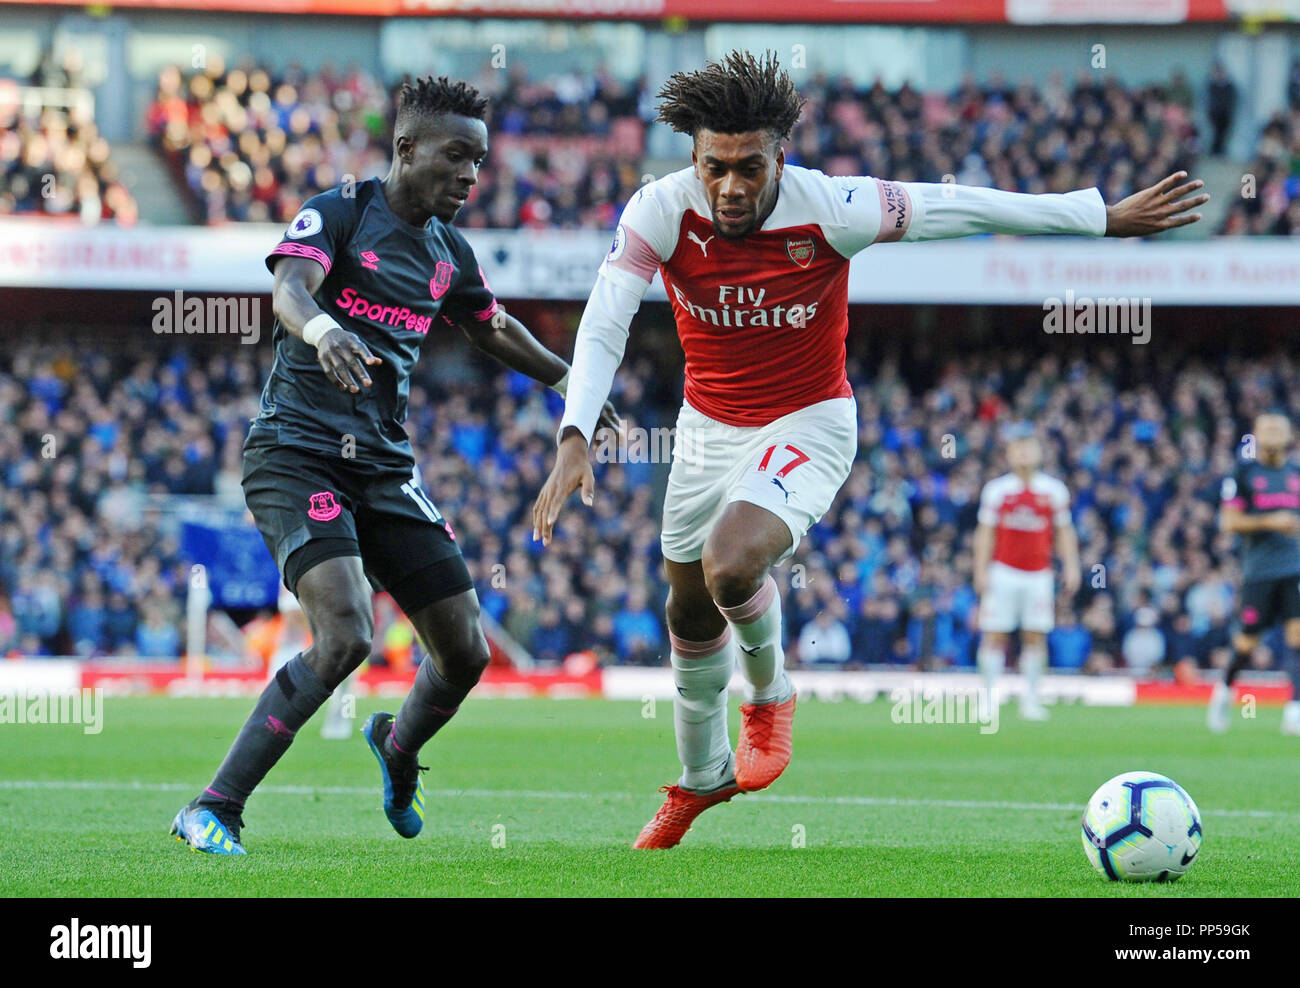 Alex Iwobi of Arsenal and Idrissa Gueye of Everton in action during the Premier League match between Arsenal and Everton at Emirates Stadium on September 23rd 2018 in London, England. (Photo by Zed Jameson/phcimages.com) Stock Photo